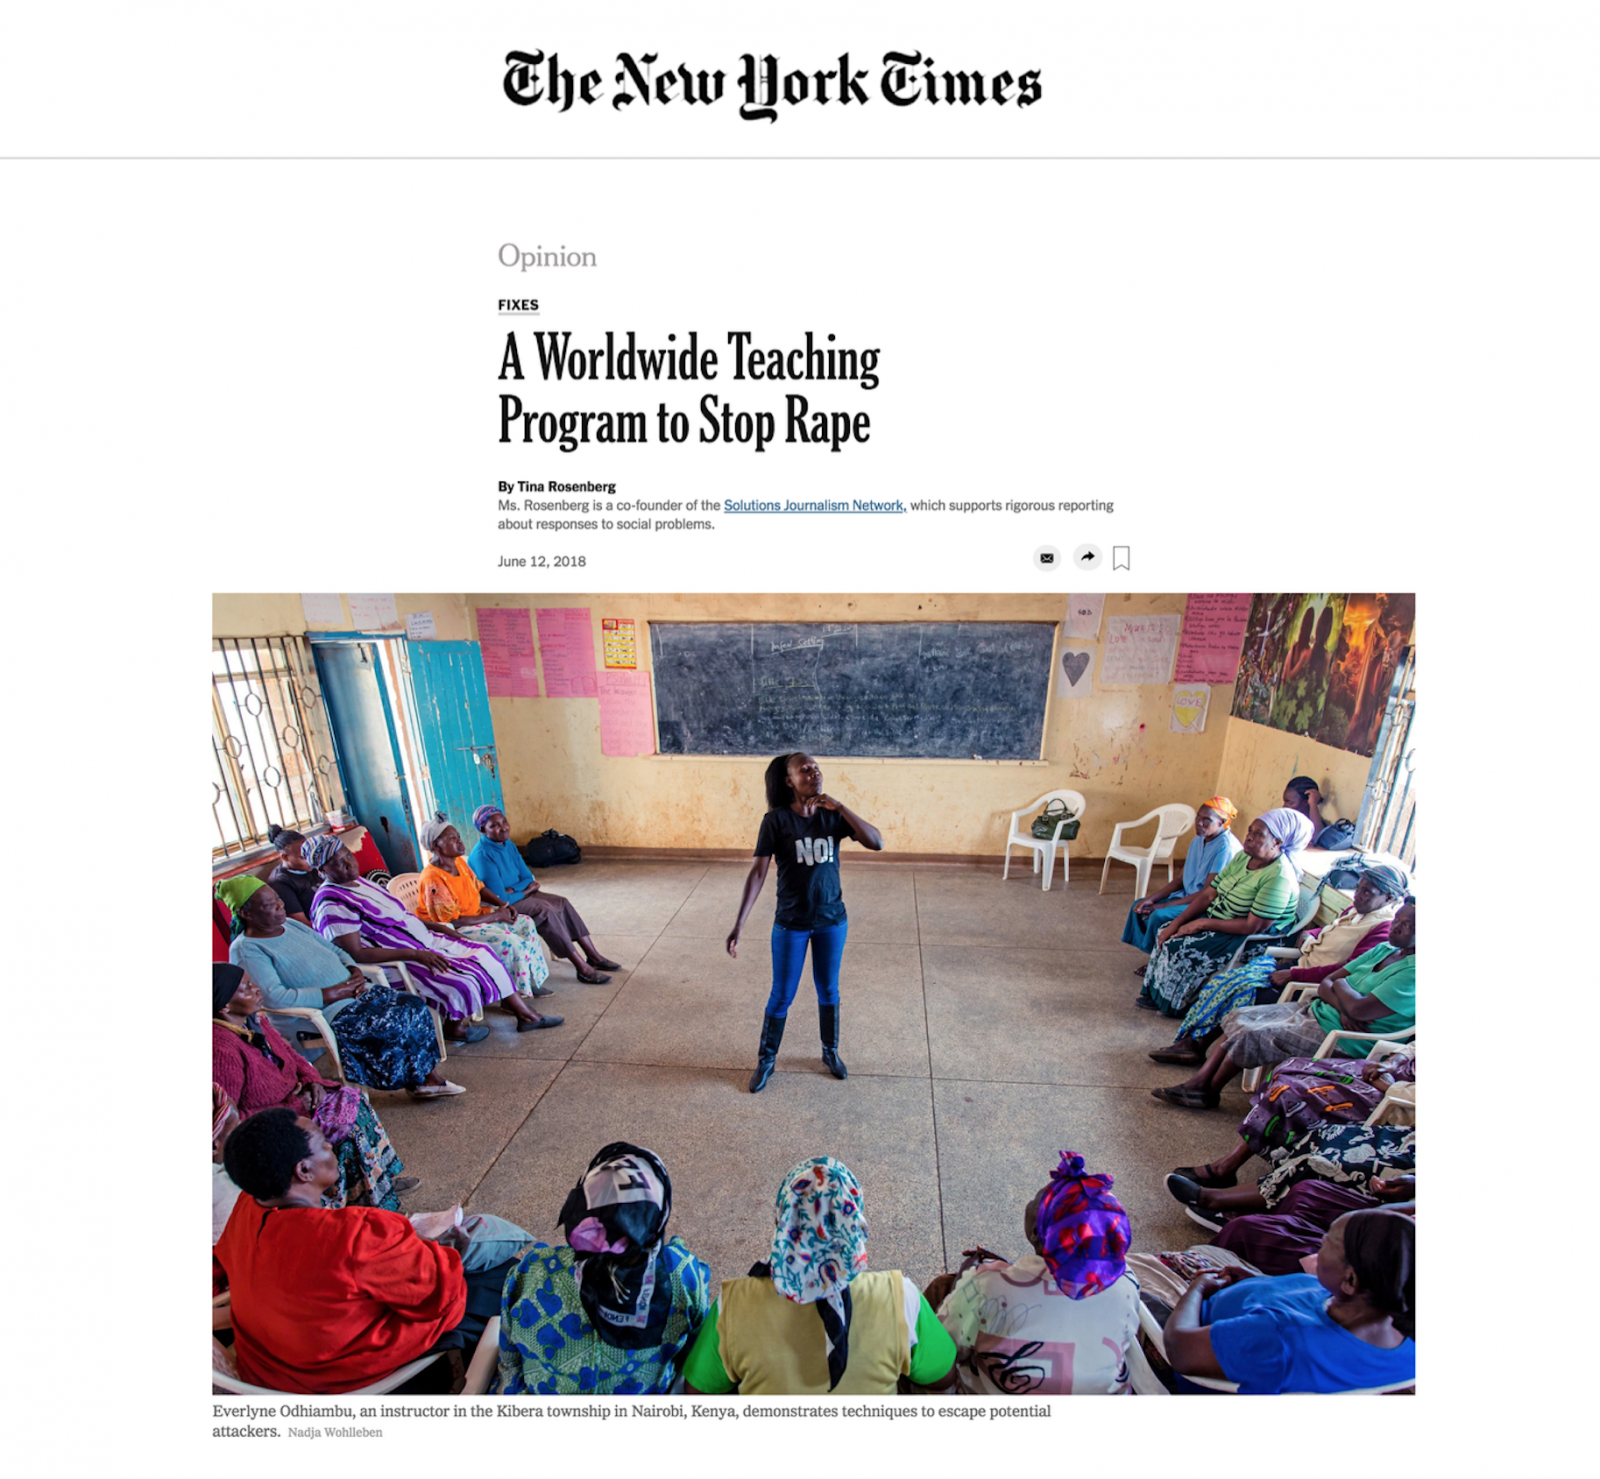 Thumbnail of 'Shosho Jikinge' published in The New York Times